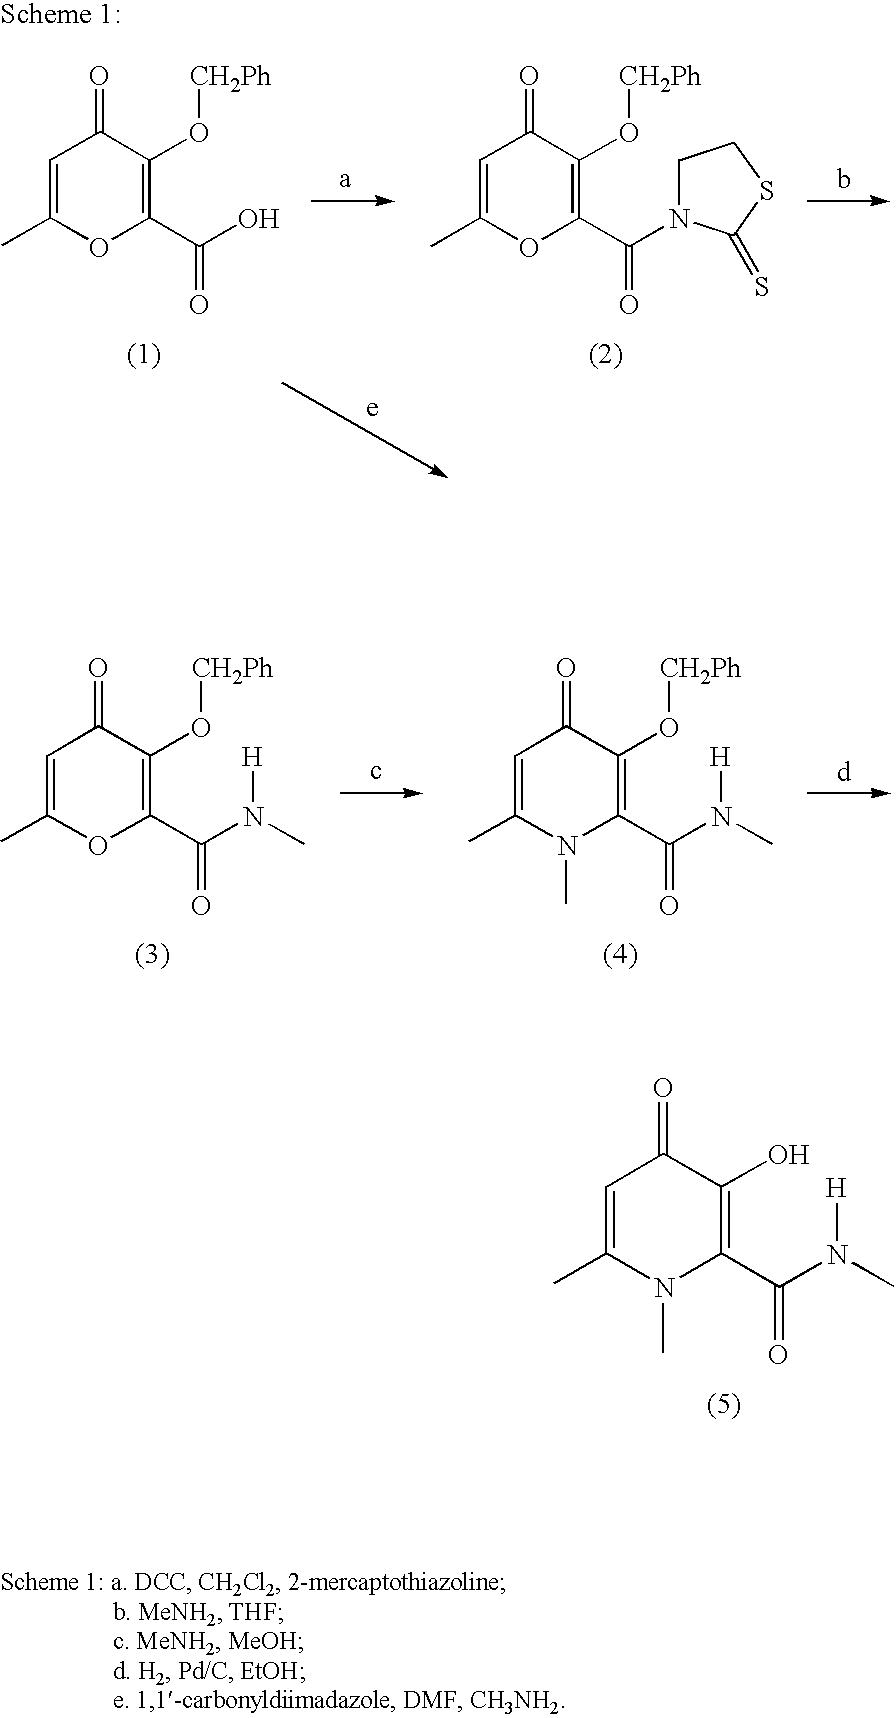 Process For The Manufacture Of 3-Hydroxy-N-Alkyl-1-Cycloalkyl-6-Alkyl-4-Oxo-1,4-Dihydropyridine-2-Carboxamide And Its Related Analogues